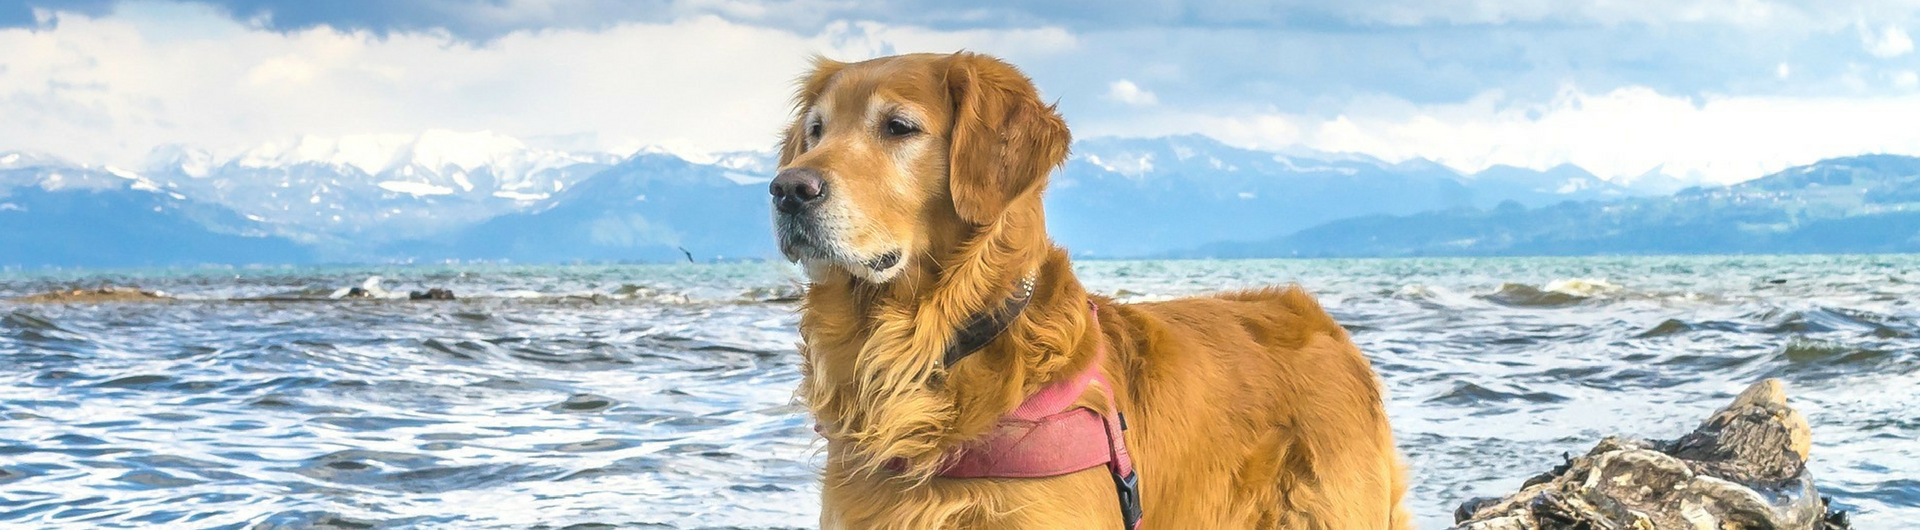 traveling with a Golden Retriever